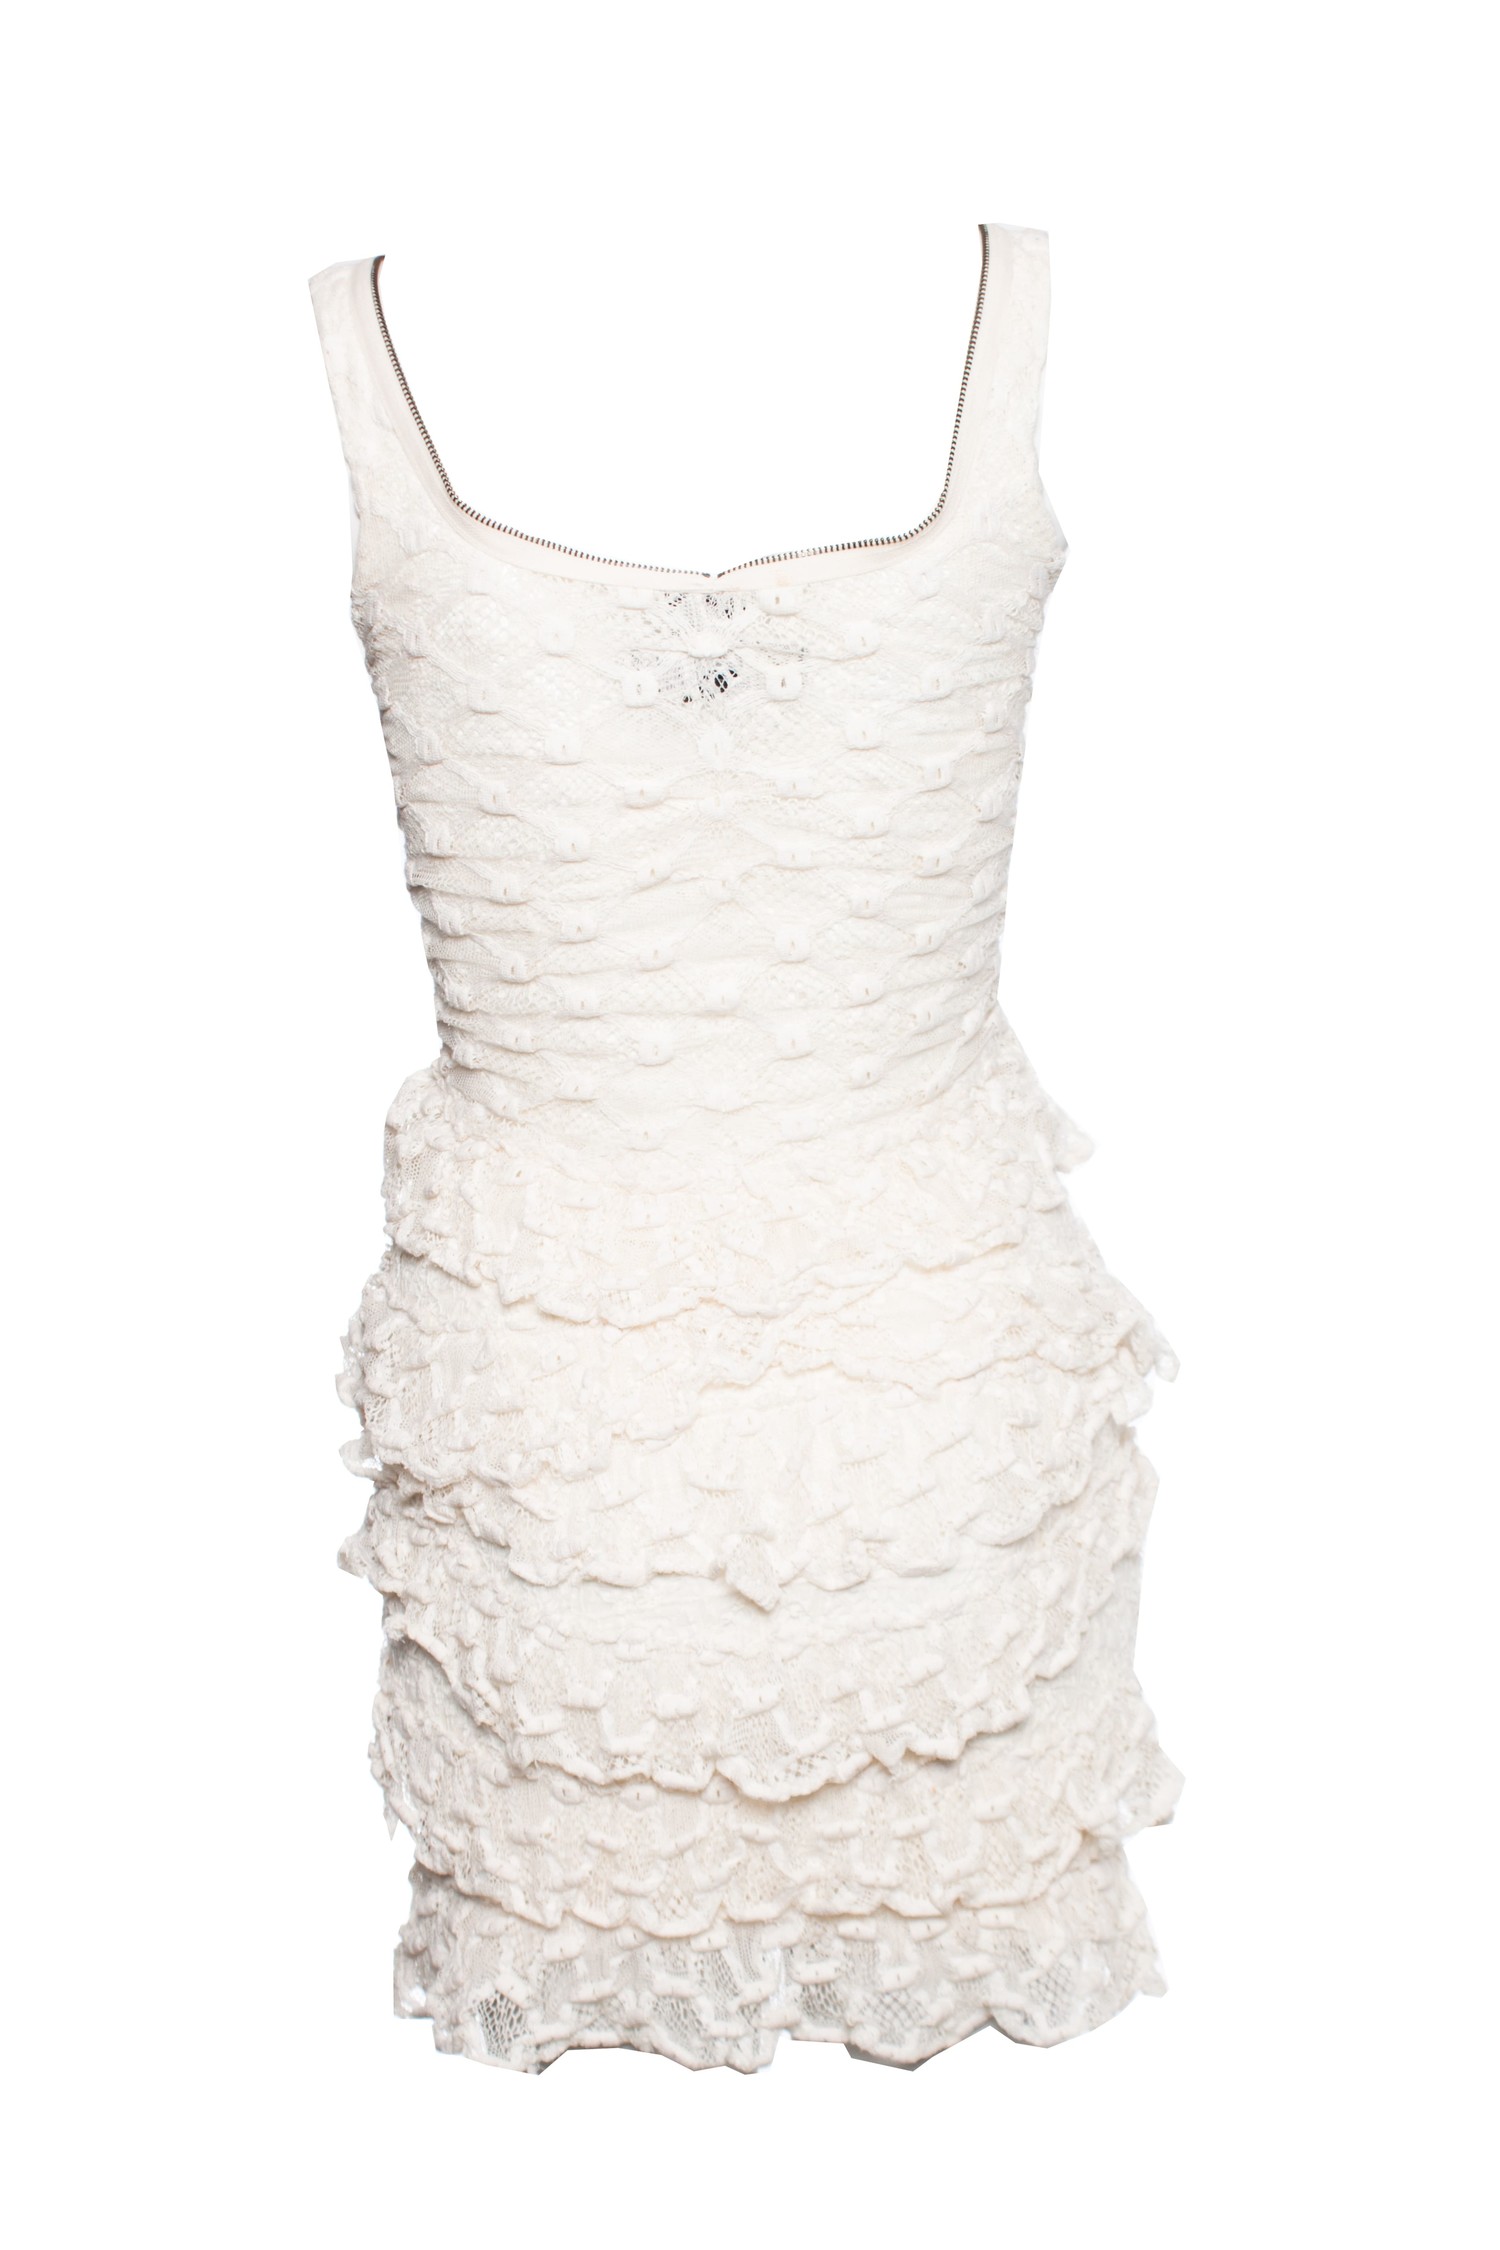 Isabel ruffle in lace - Designer Pieces